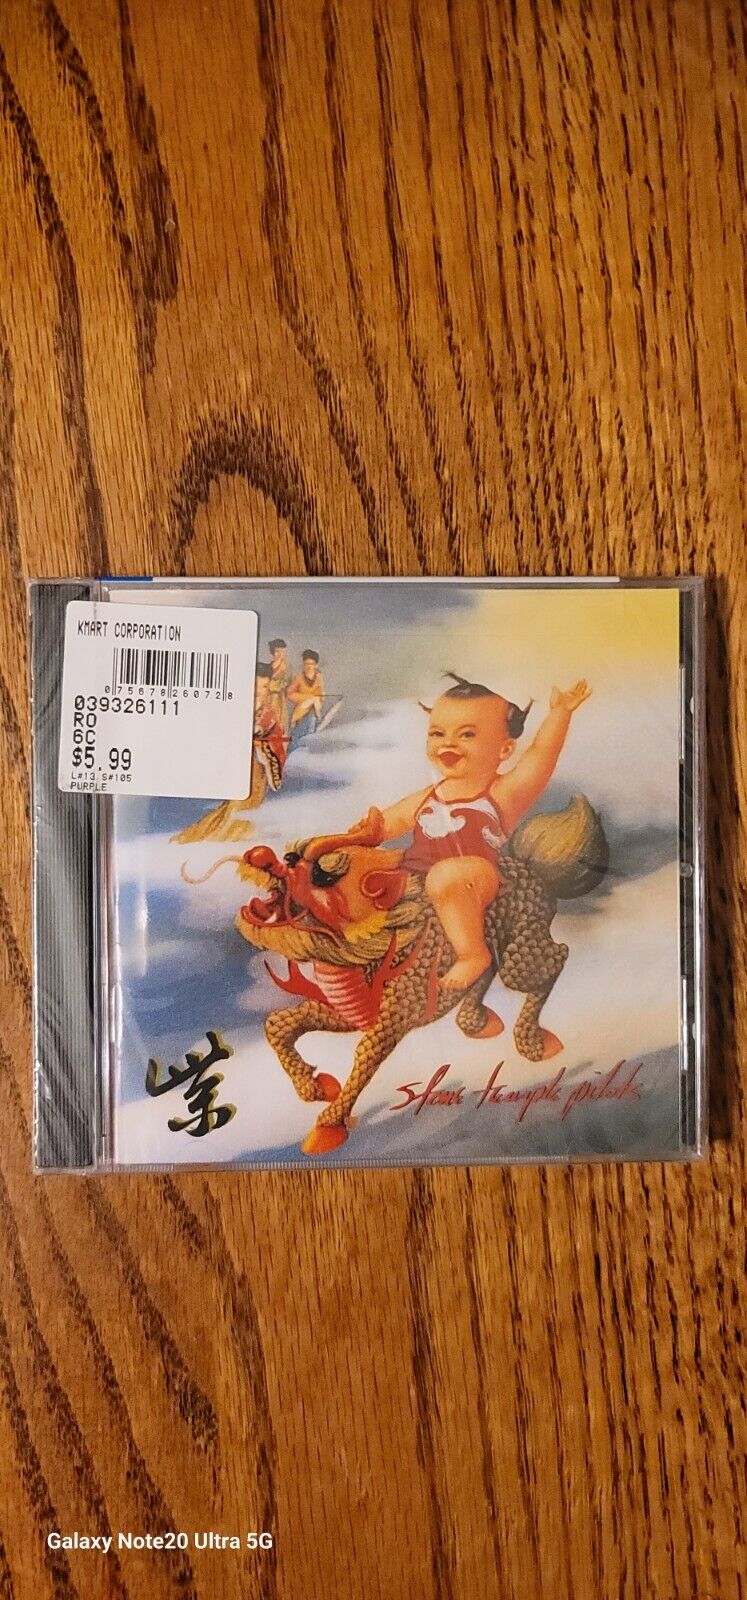 Purple by Stone Temple Pilots (CD, 1994) - BRAND NEW